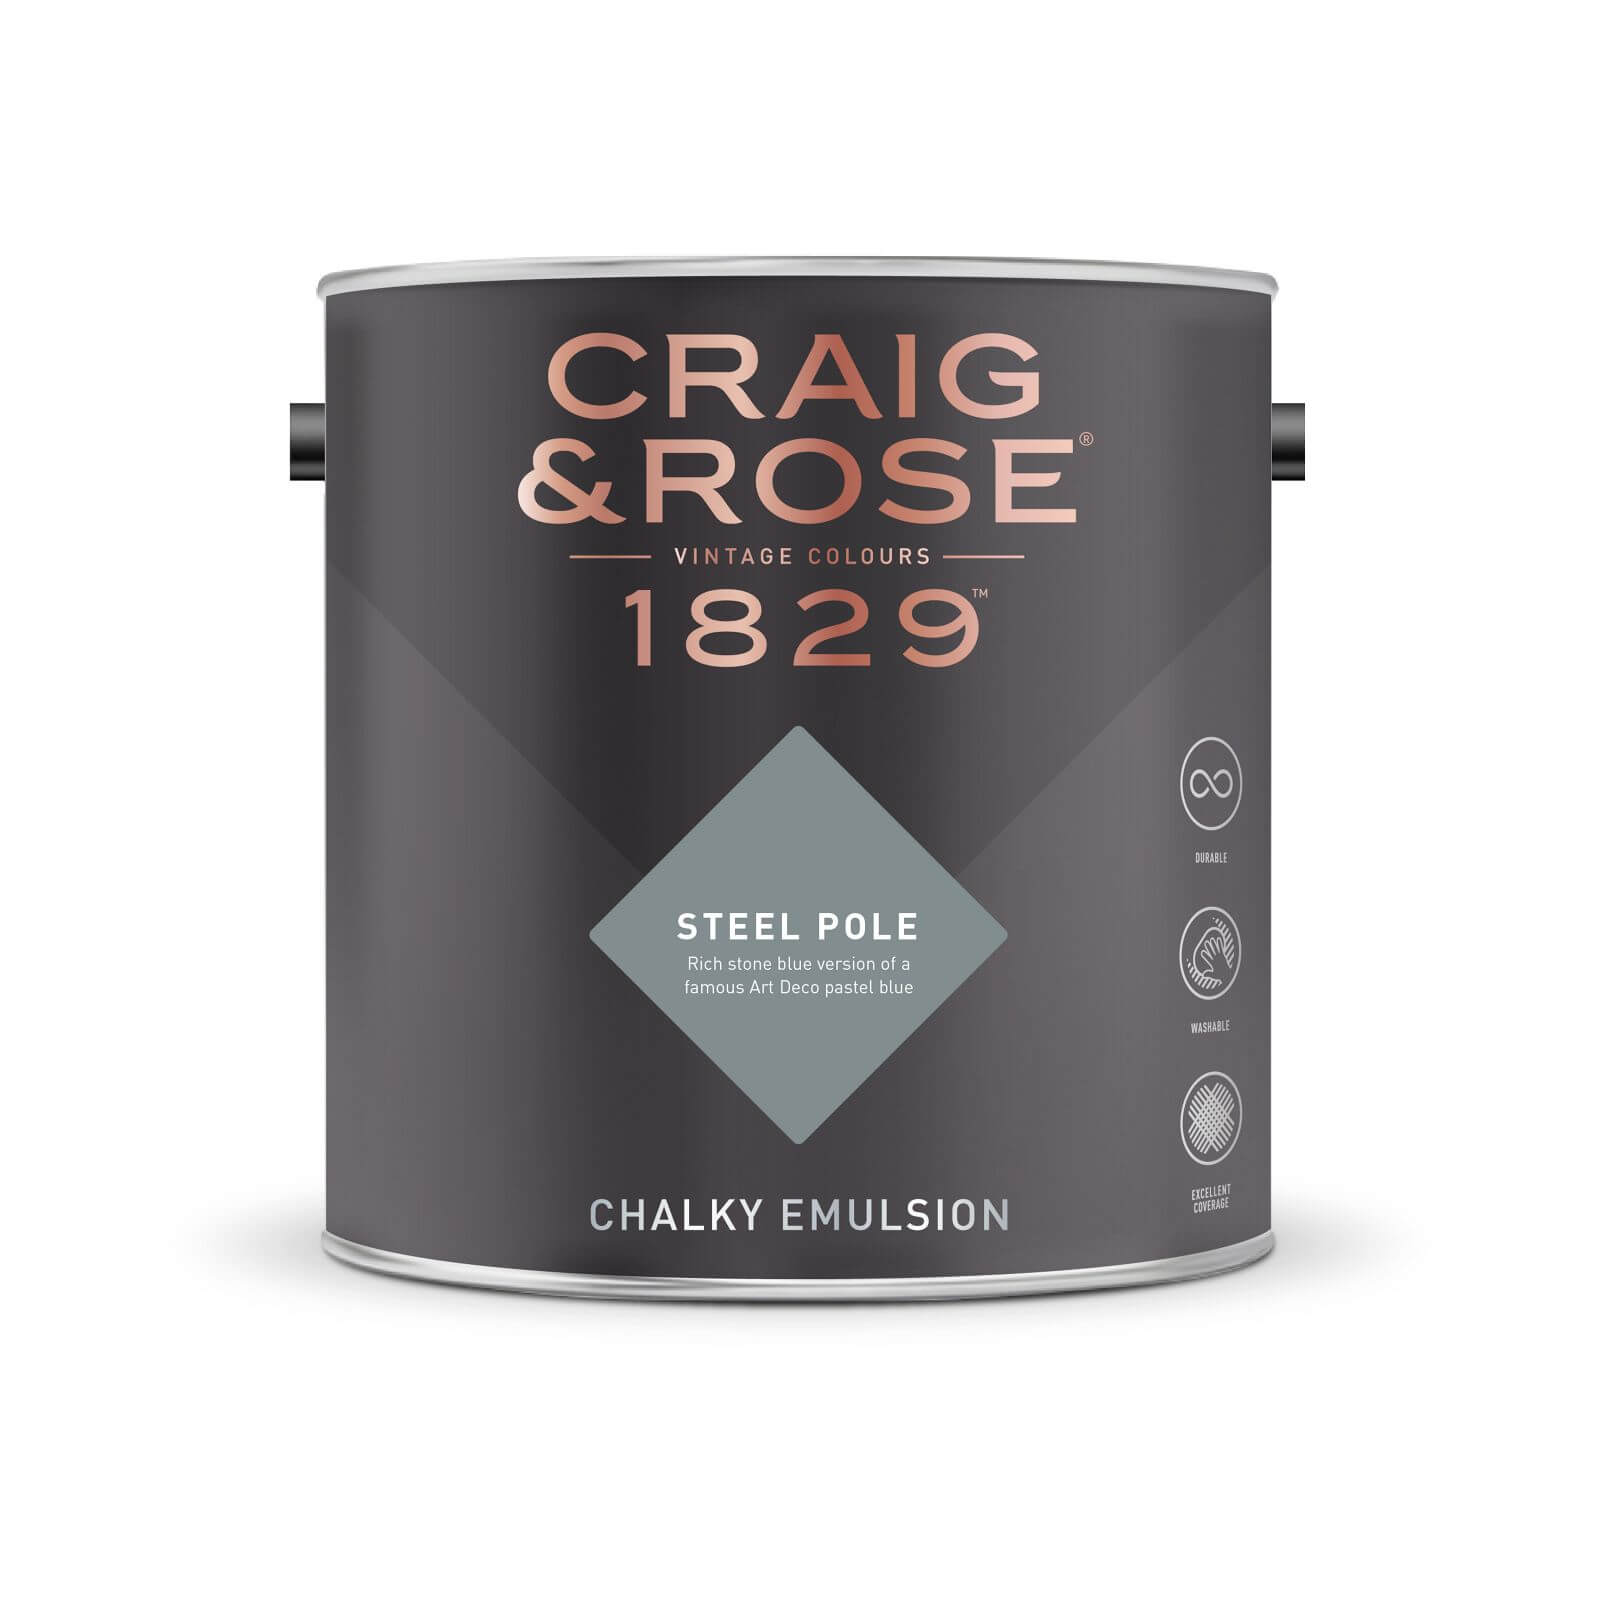 Craig & Rose 1829 Chalky Emulsion Paint Steel Pole - Tester 50ml